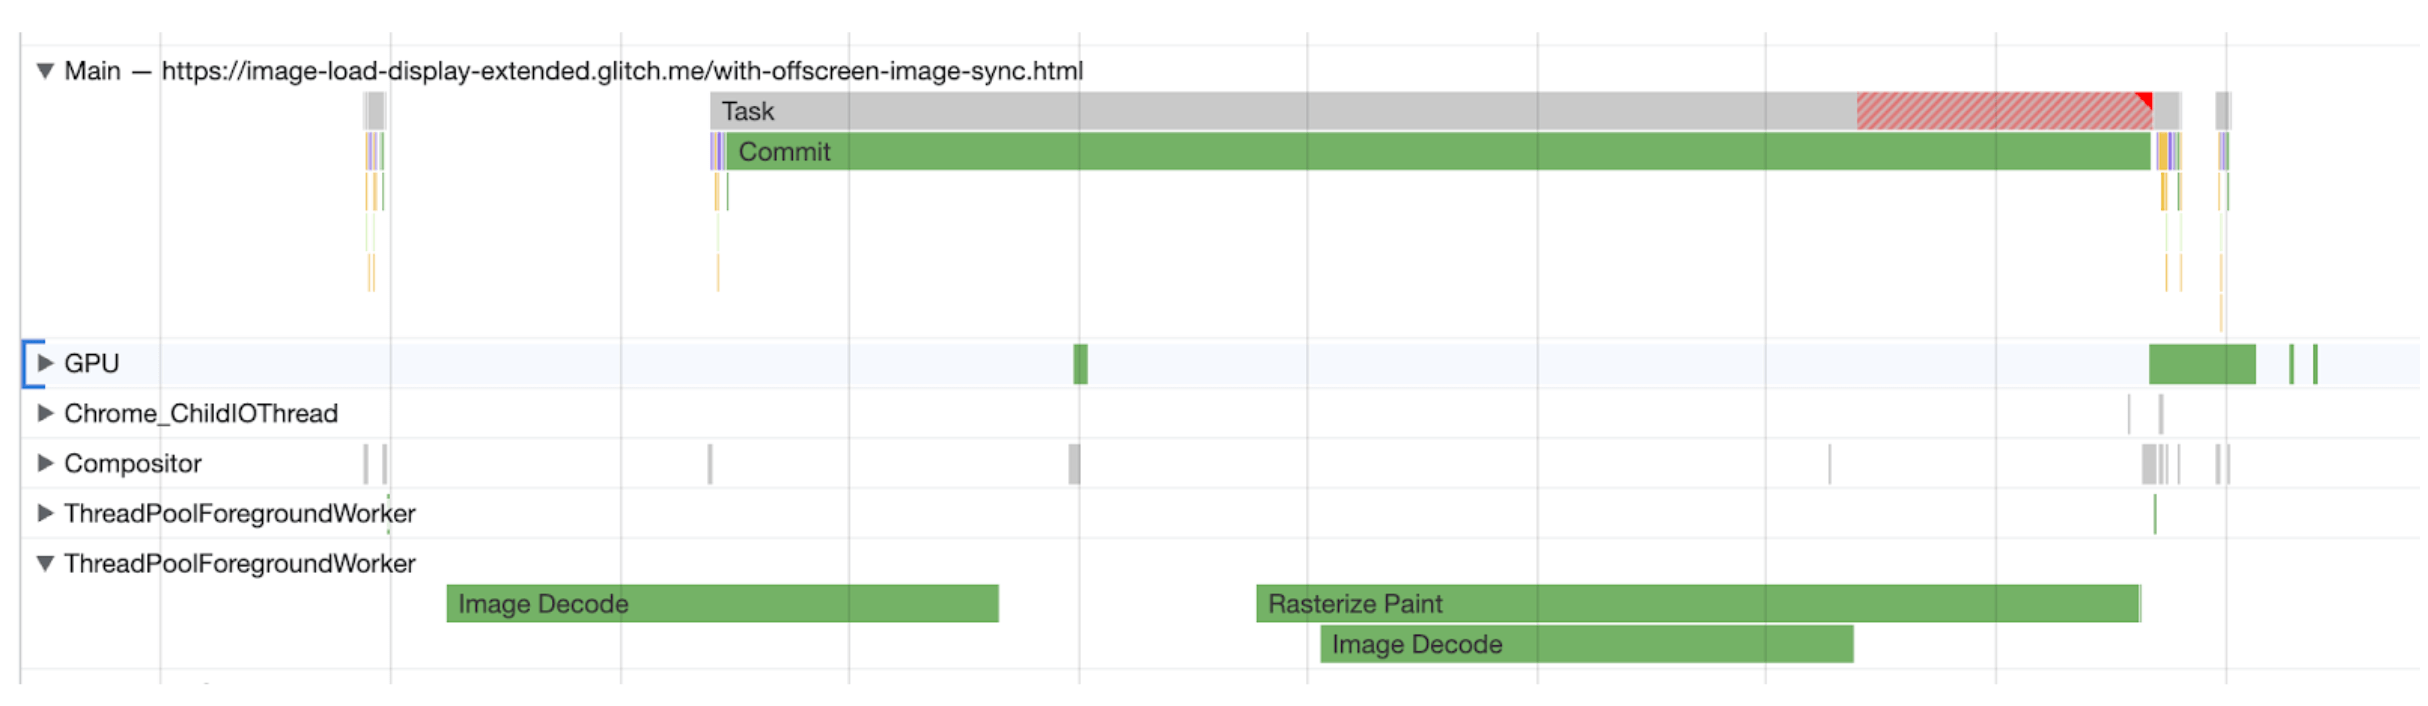 A performance trace showing the image is decoded off the main thread, but a large Commit long task blocks the main thread anyway.